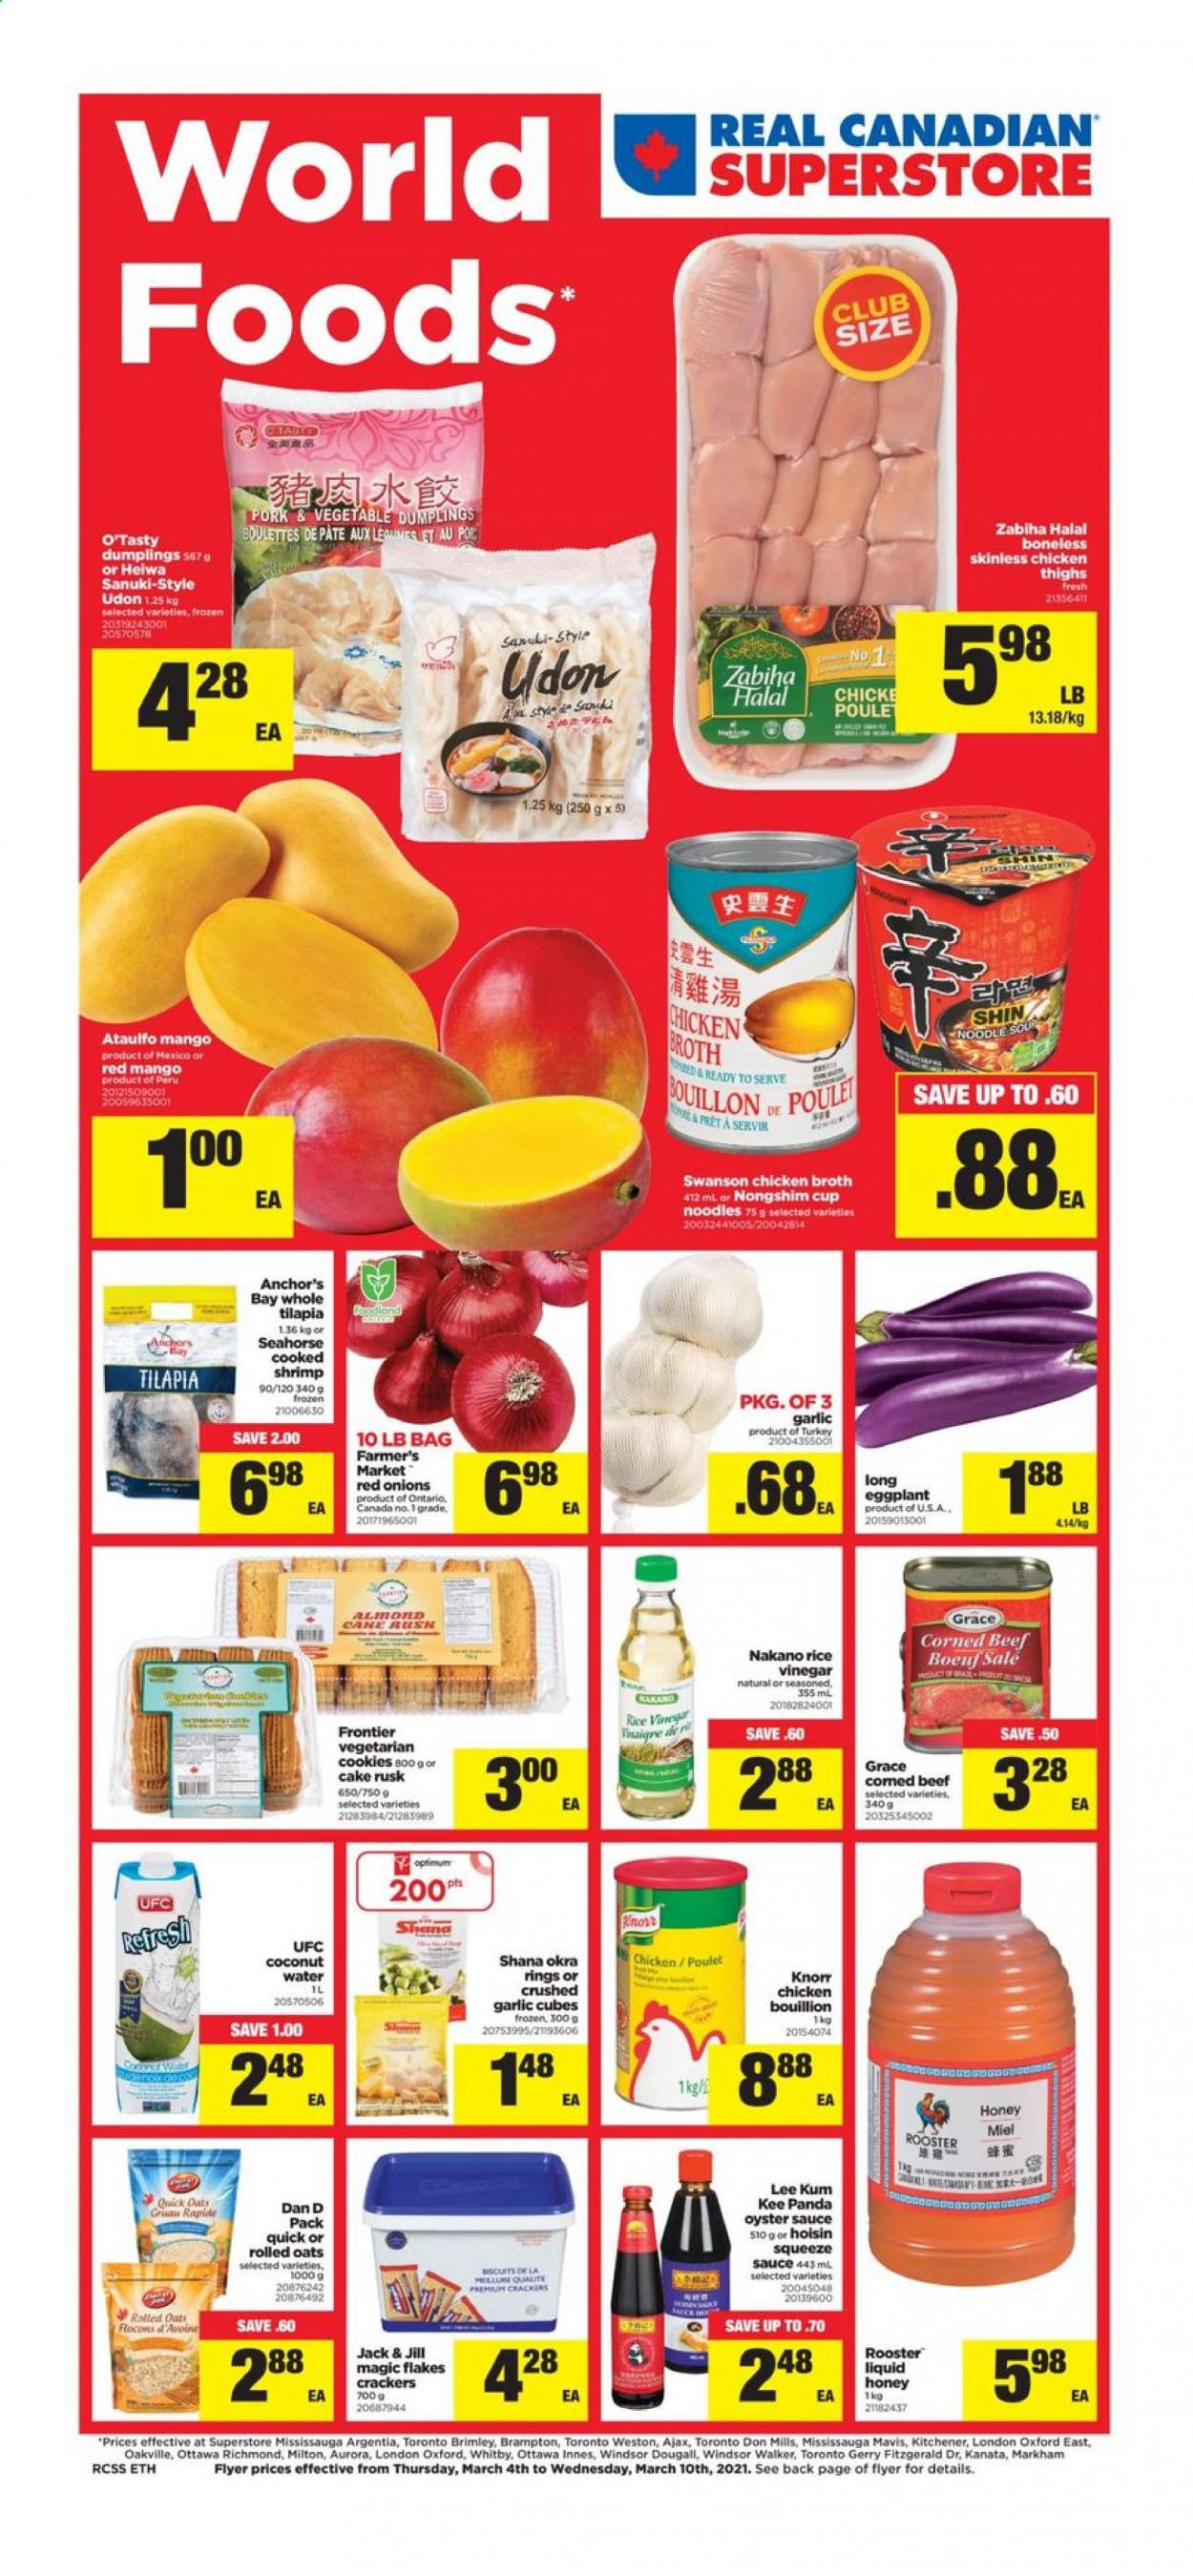 thumbnail - Real Canadian Superstore Flyer - March 04, 2021 - March 10, 2021 - Sales products - cake, rusks, garlic, red onions, okra, onion, eggplant, mango, tilapia, oysters, shrimps, sauce, dumplings, noodles cup, noodles, corned beef, Anchor, cookies, crackers, chicken broth, oats, broth, rolled oats, Quick Oats, hoisin sauce, oyster sauce, Lee Kum Kee, rice vinegar, vinegar, honey, coconut water, chicken thighs, chicken, beef meat, Ajax, Optimum, panda, Knorr. Page 1.